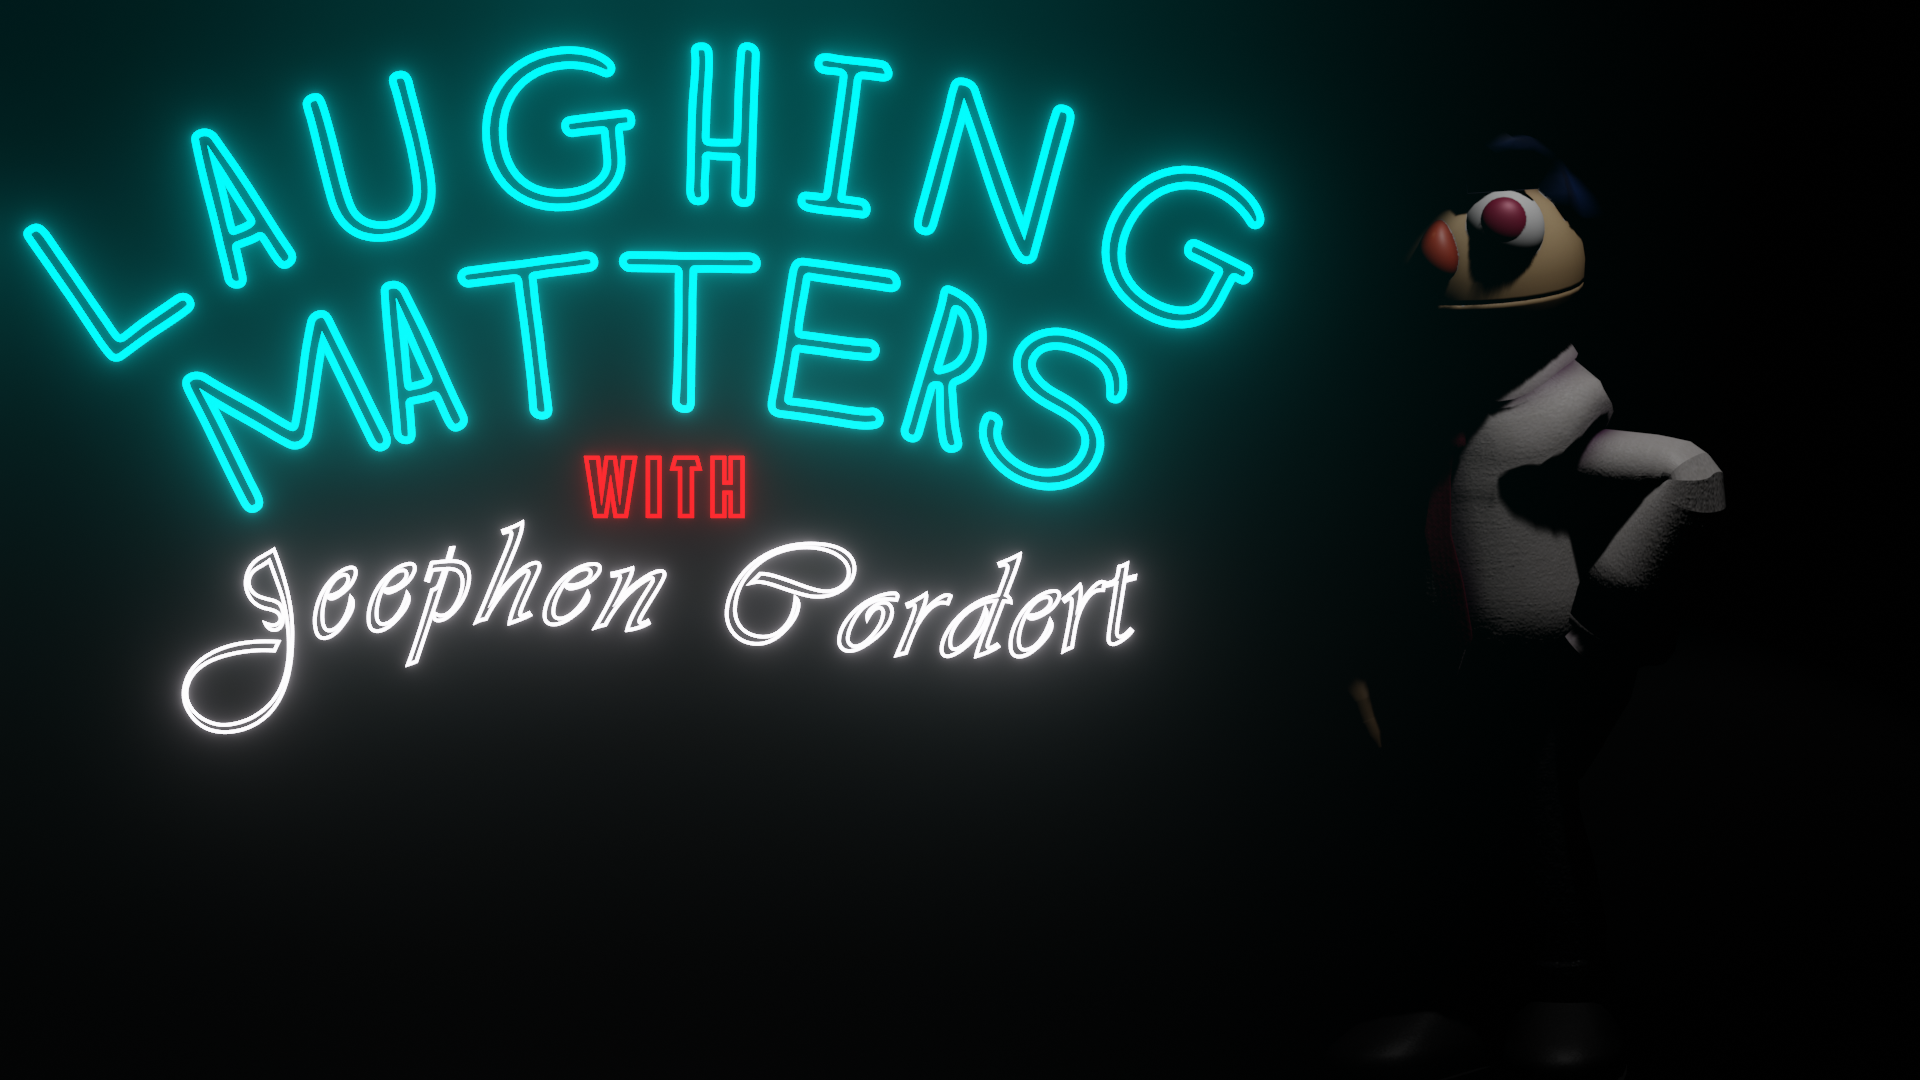 Laughing Matters With Jeephen Cordert